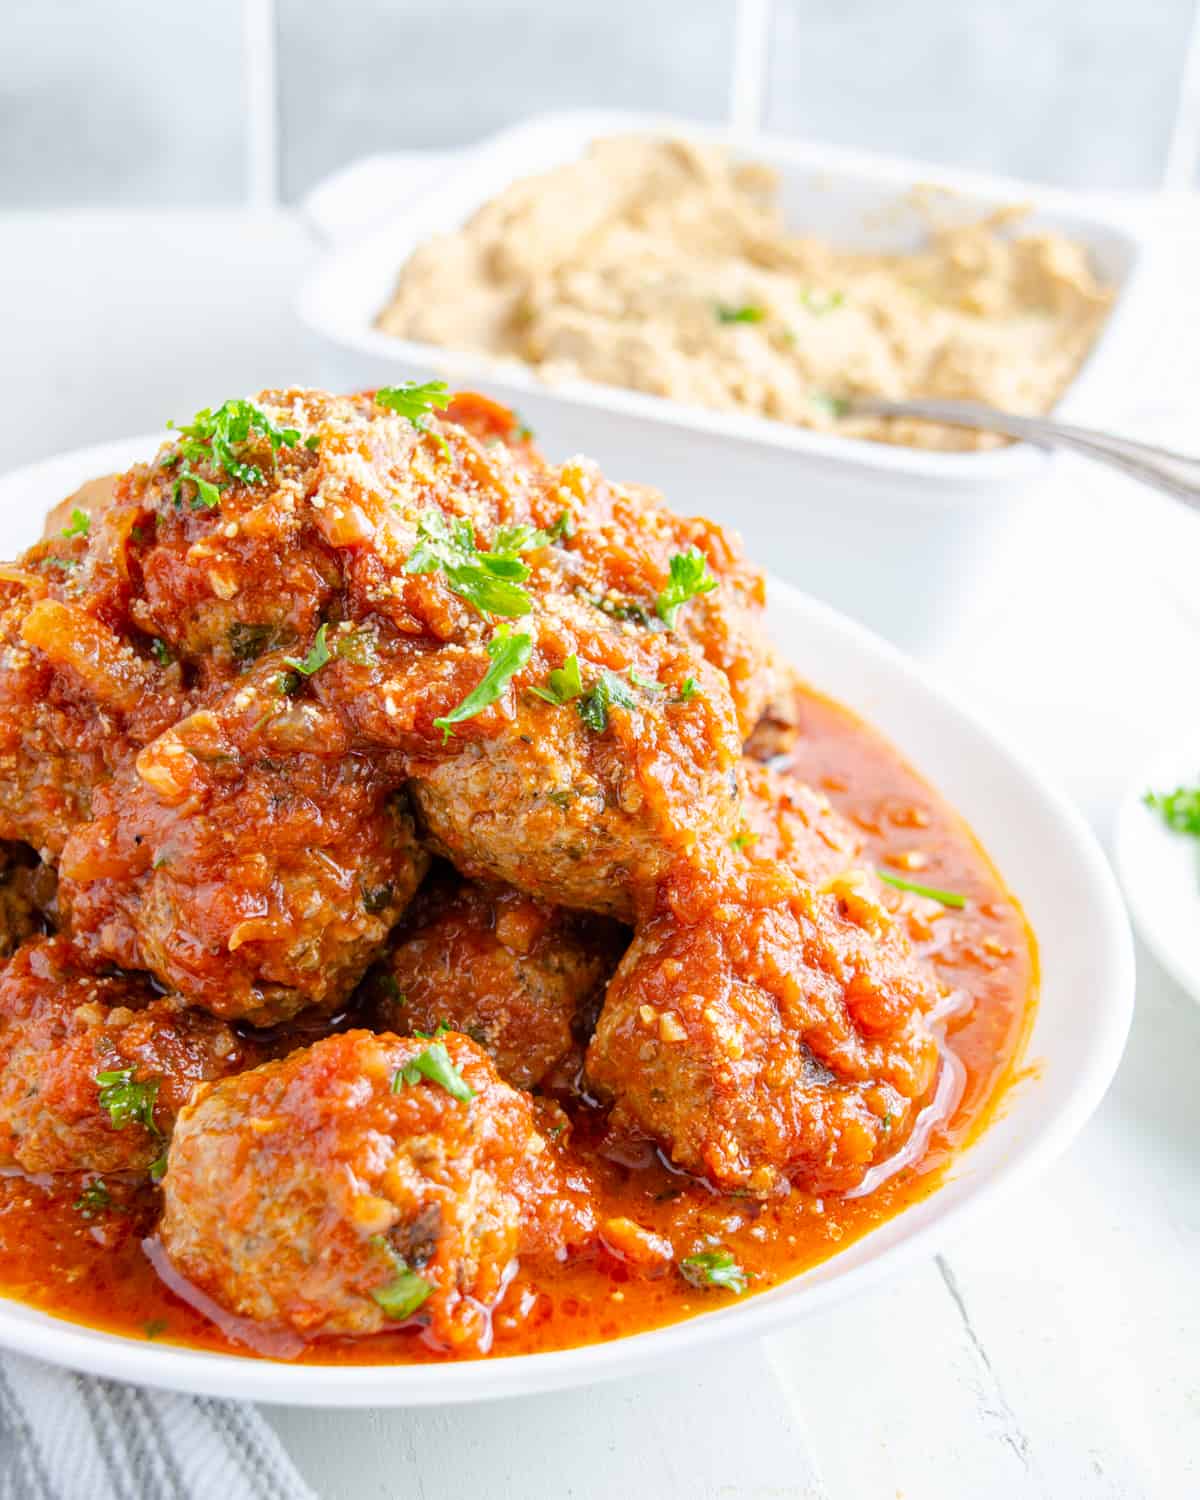 Low Carb Italian Meatballs with mashed cauliflower